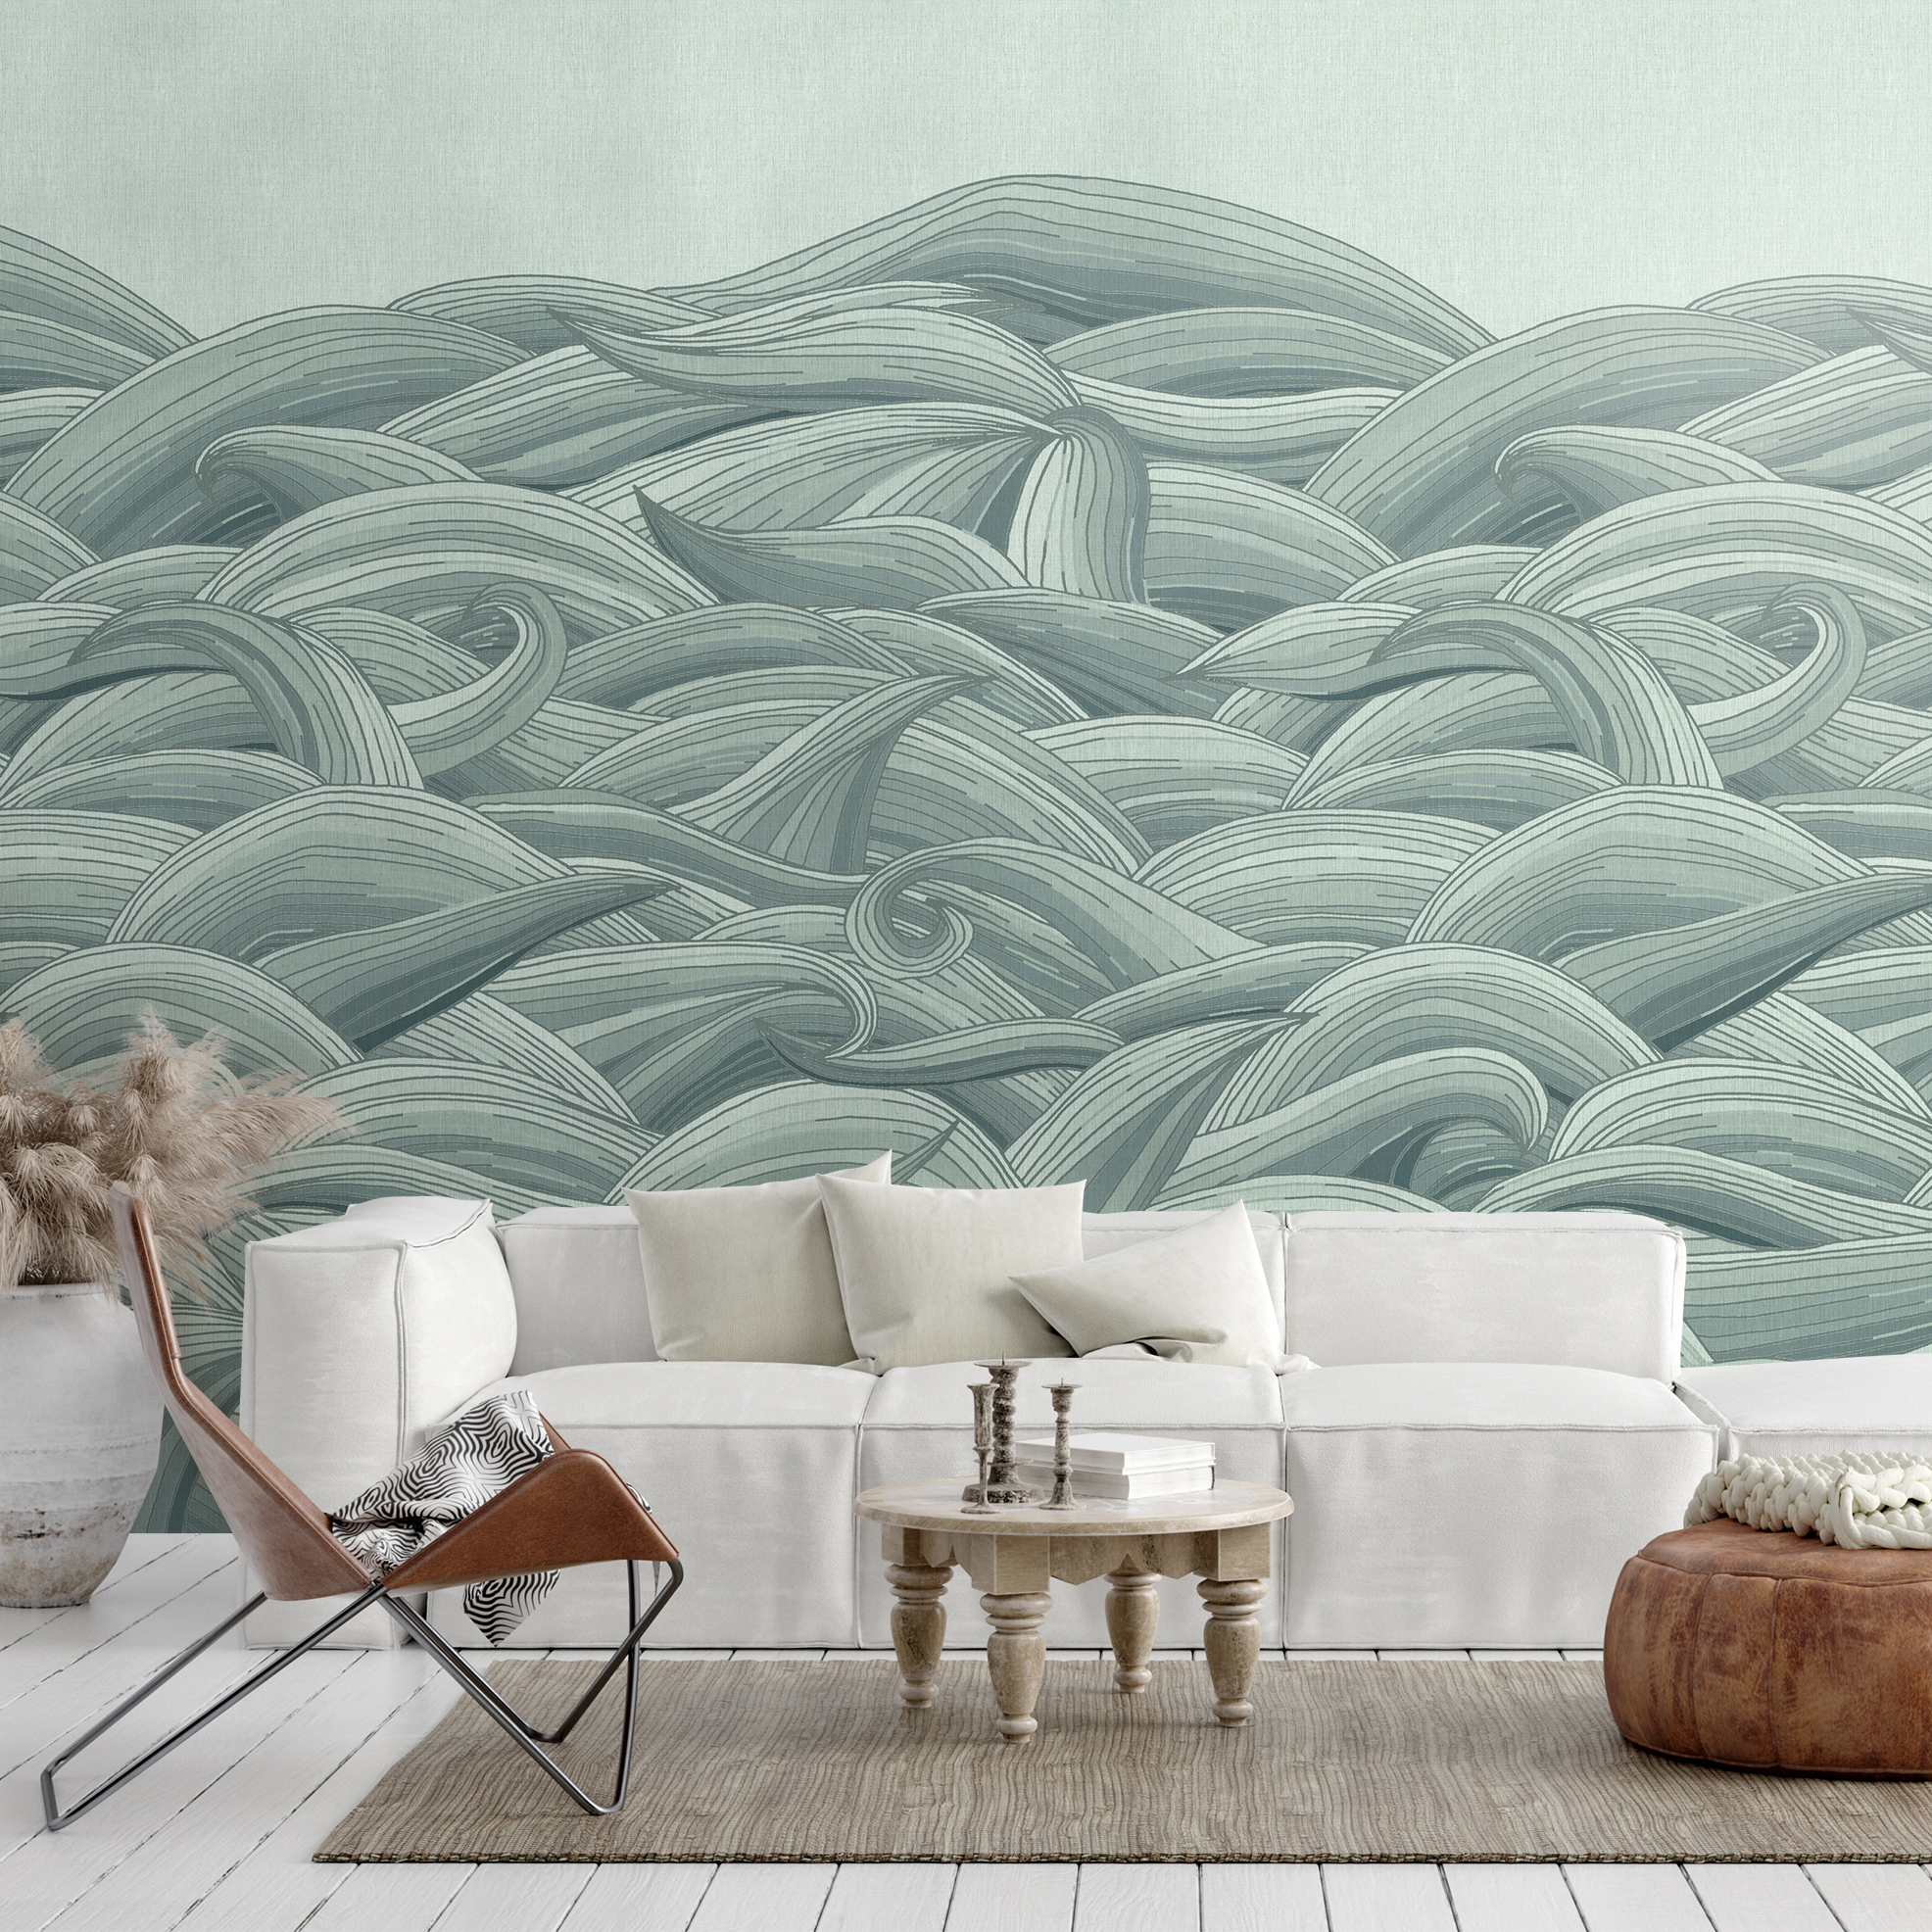 Mural with wave pattern in 2 different colors | Hohenberger